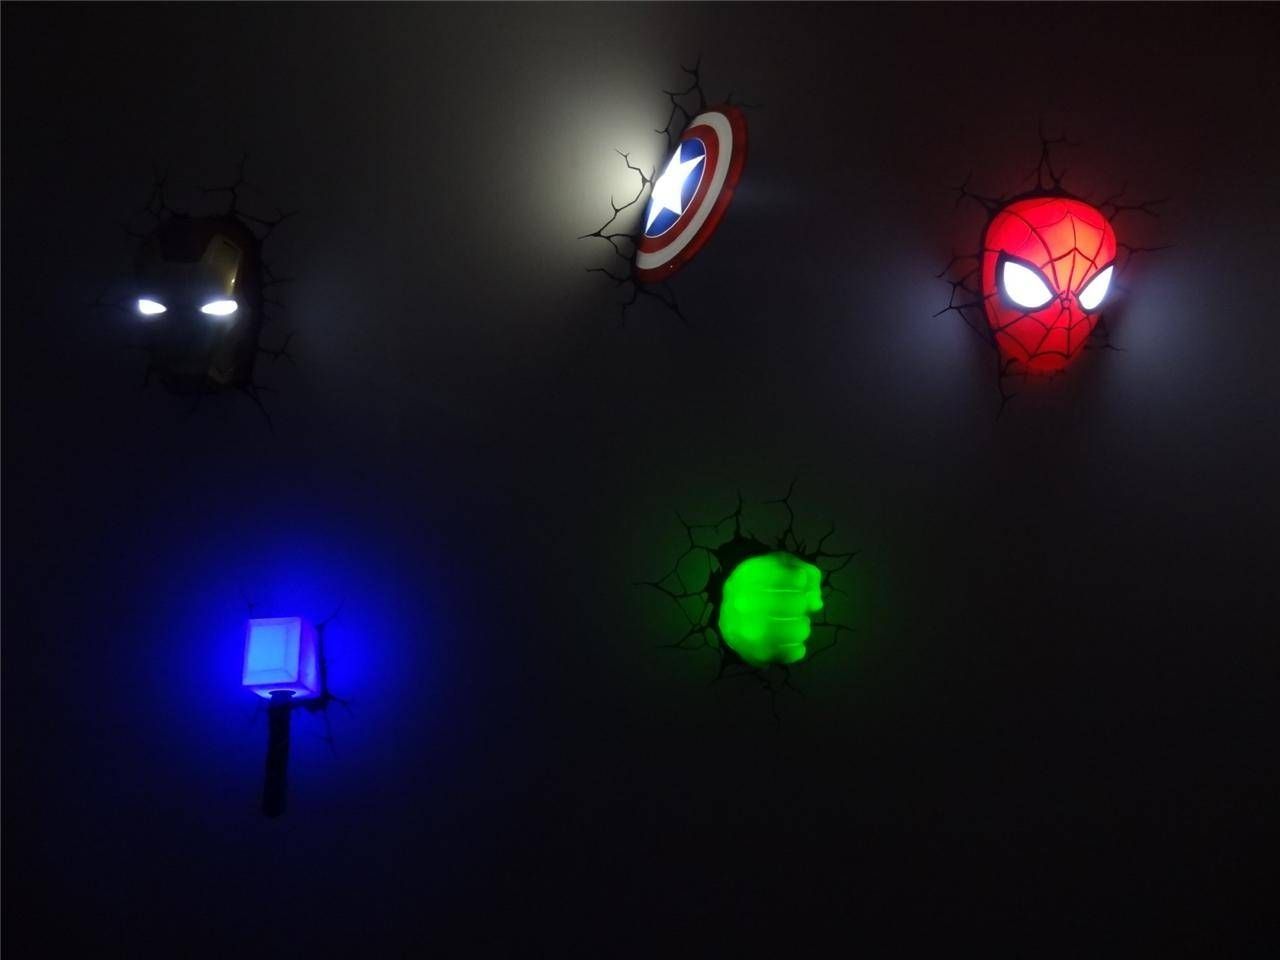 3d Wall Art Captain America Night Light | Wallartideas Within Best And Newest Captain America 3d Wall Art (Gallery 19 of 20)